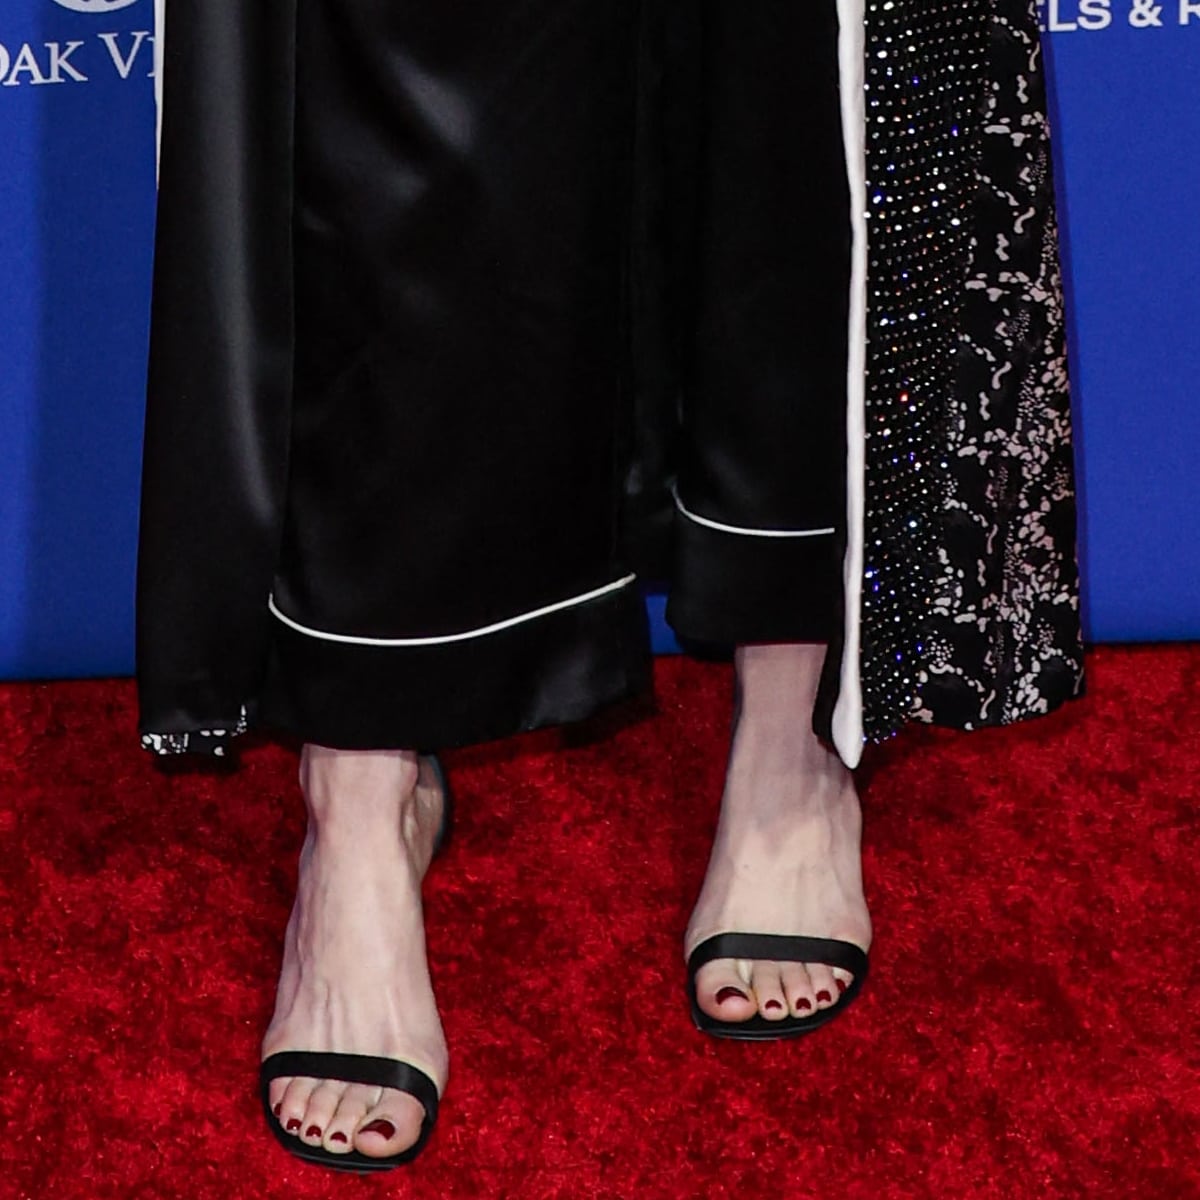 Emma Stone showcases her feet and impeccable taste in footwear with elegant Louis Vuitton strappy sandals accented by a deep rouge pedicure, adding a subtle yet sophisticated touch to her overall ensemble